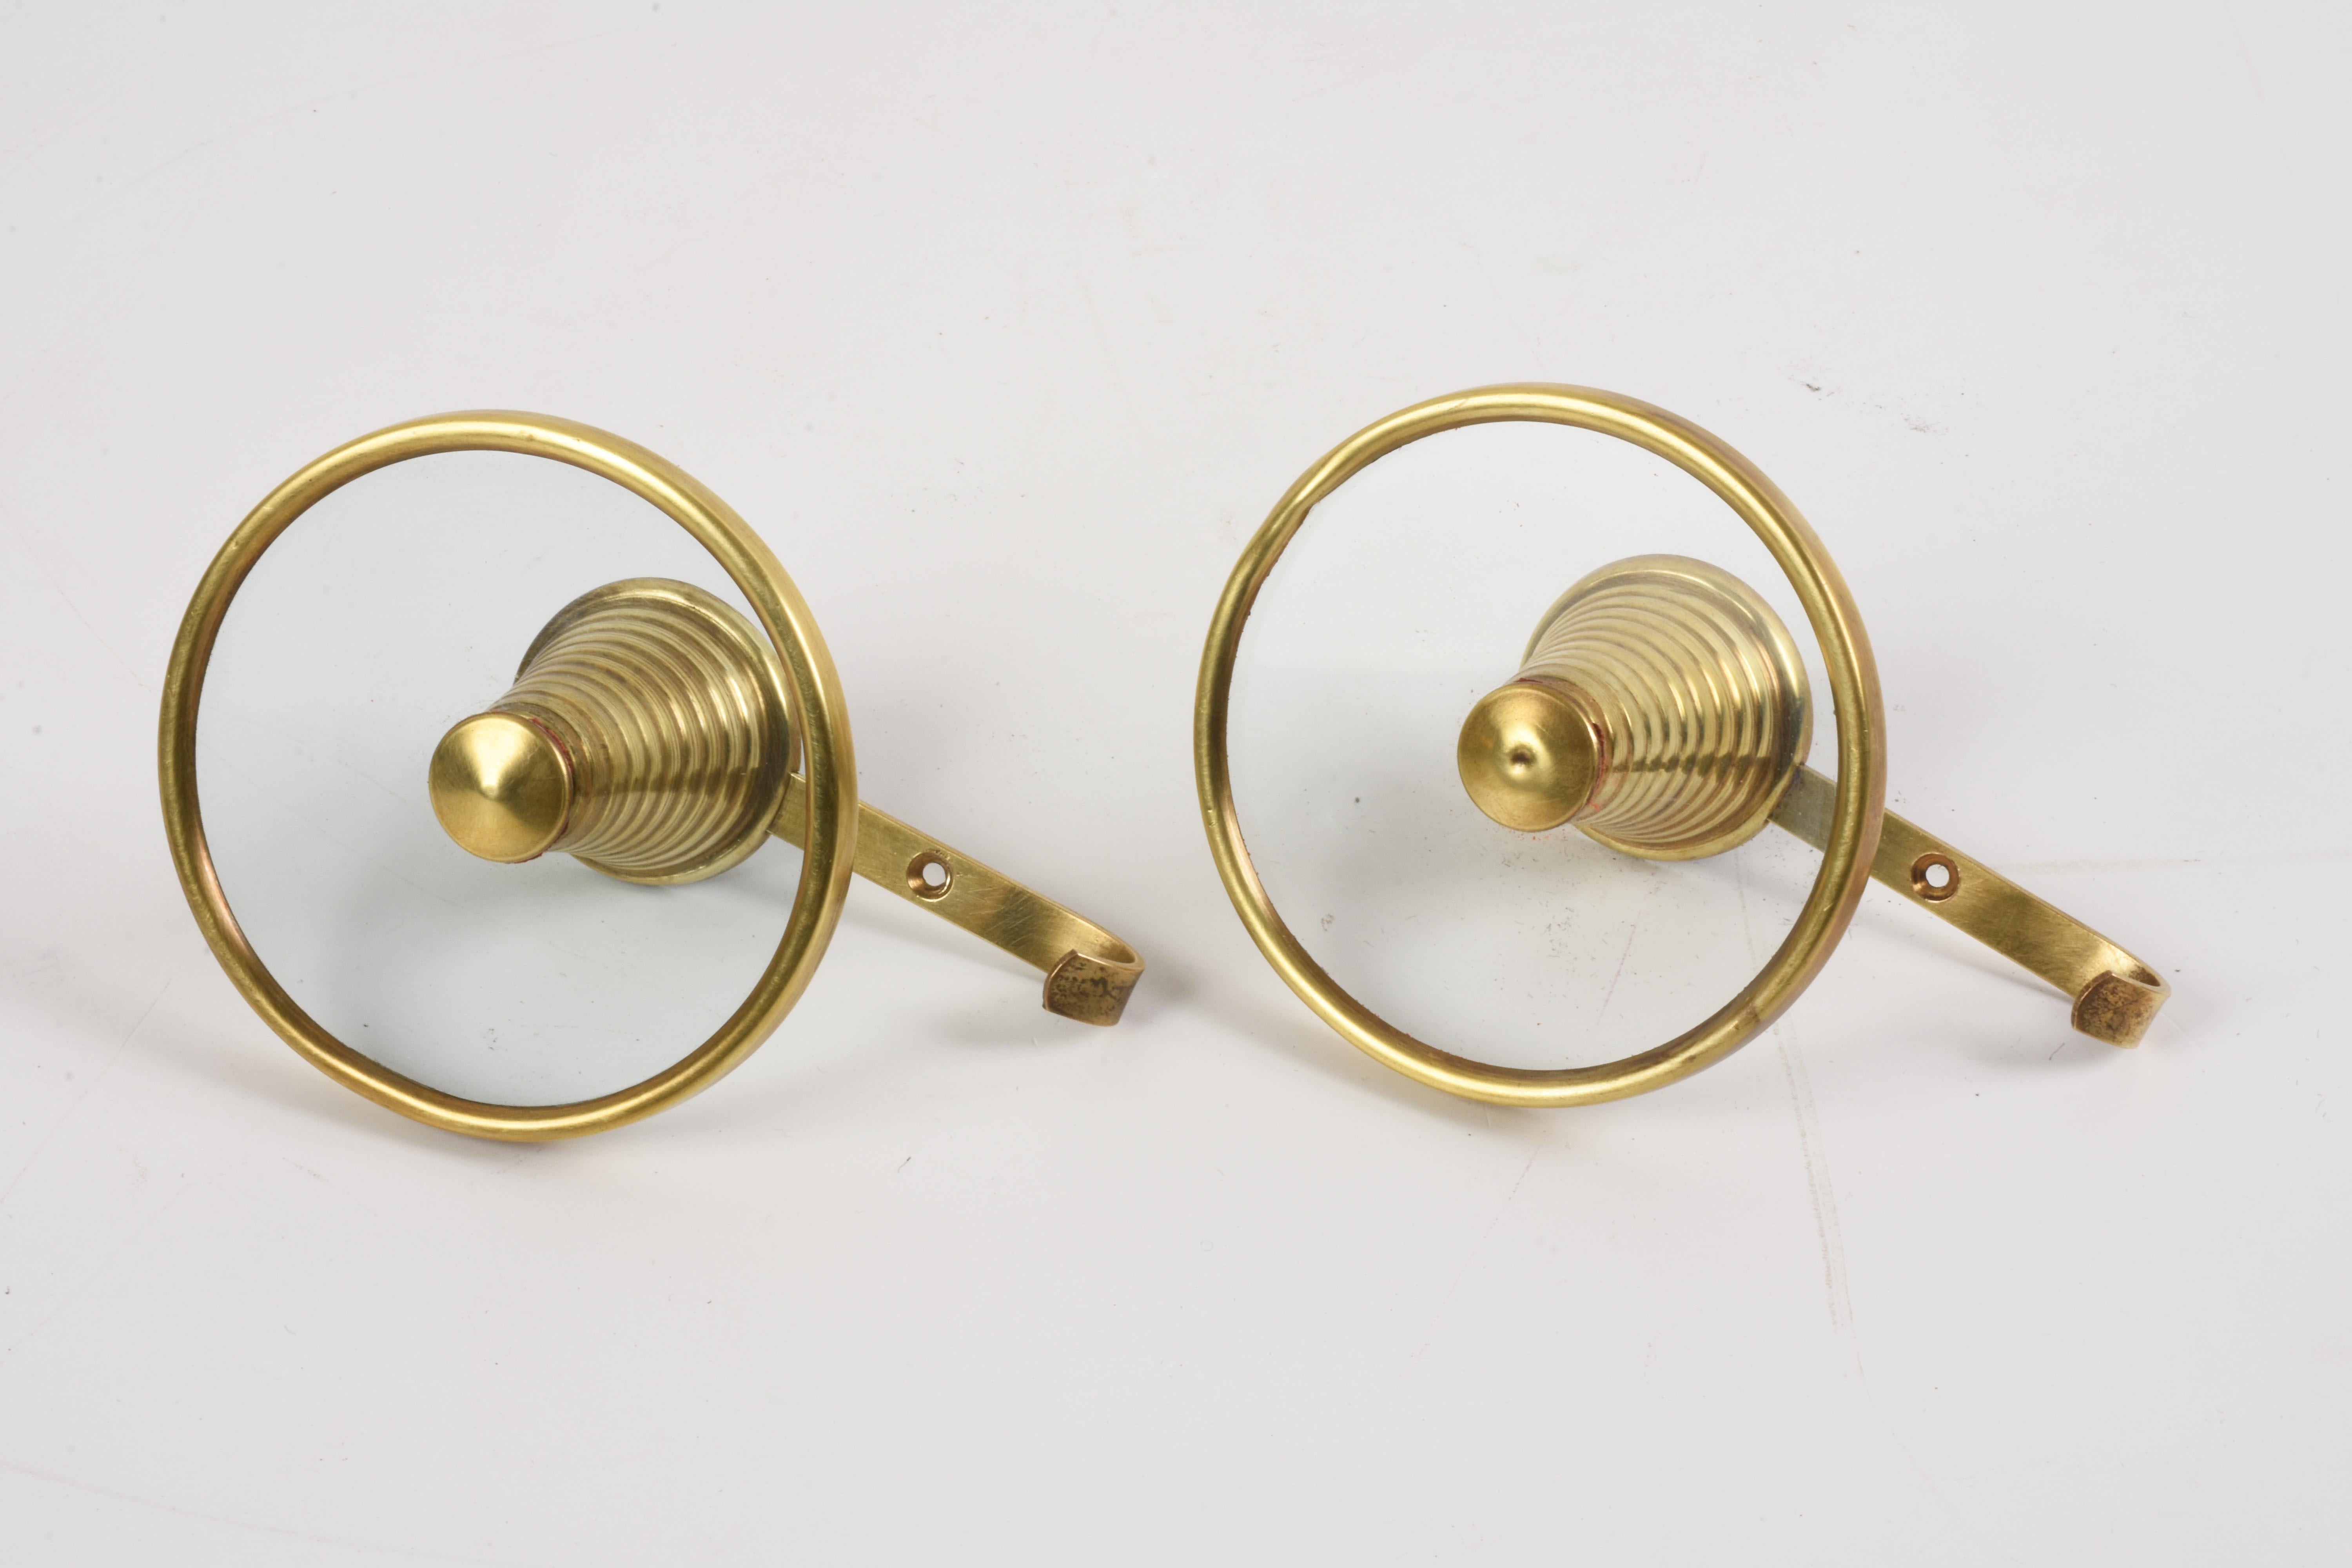 Amazing pair of brass and glass coat hooks.

They are attributed to Fontana Arte and they were produced in Italy during the 1950s.

Glass and brass are integrated with a functional outcome that is unique, making this set perfect for an entrance